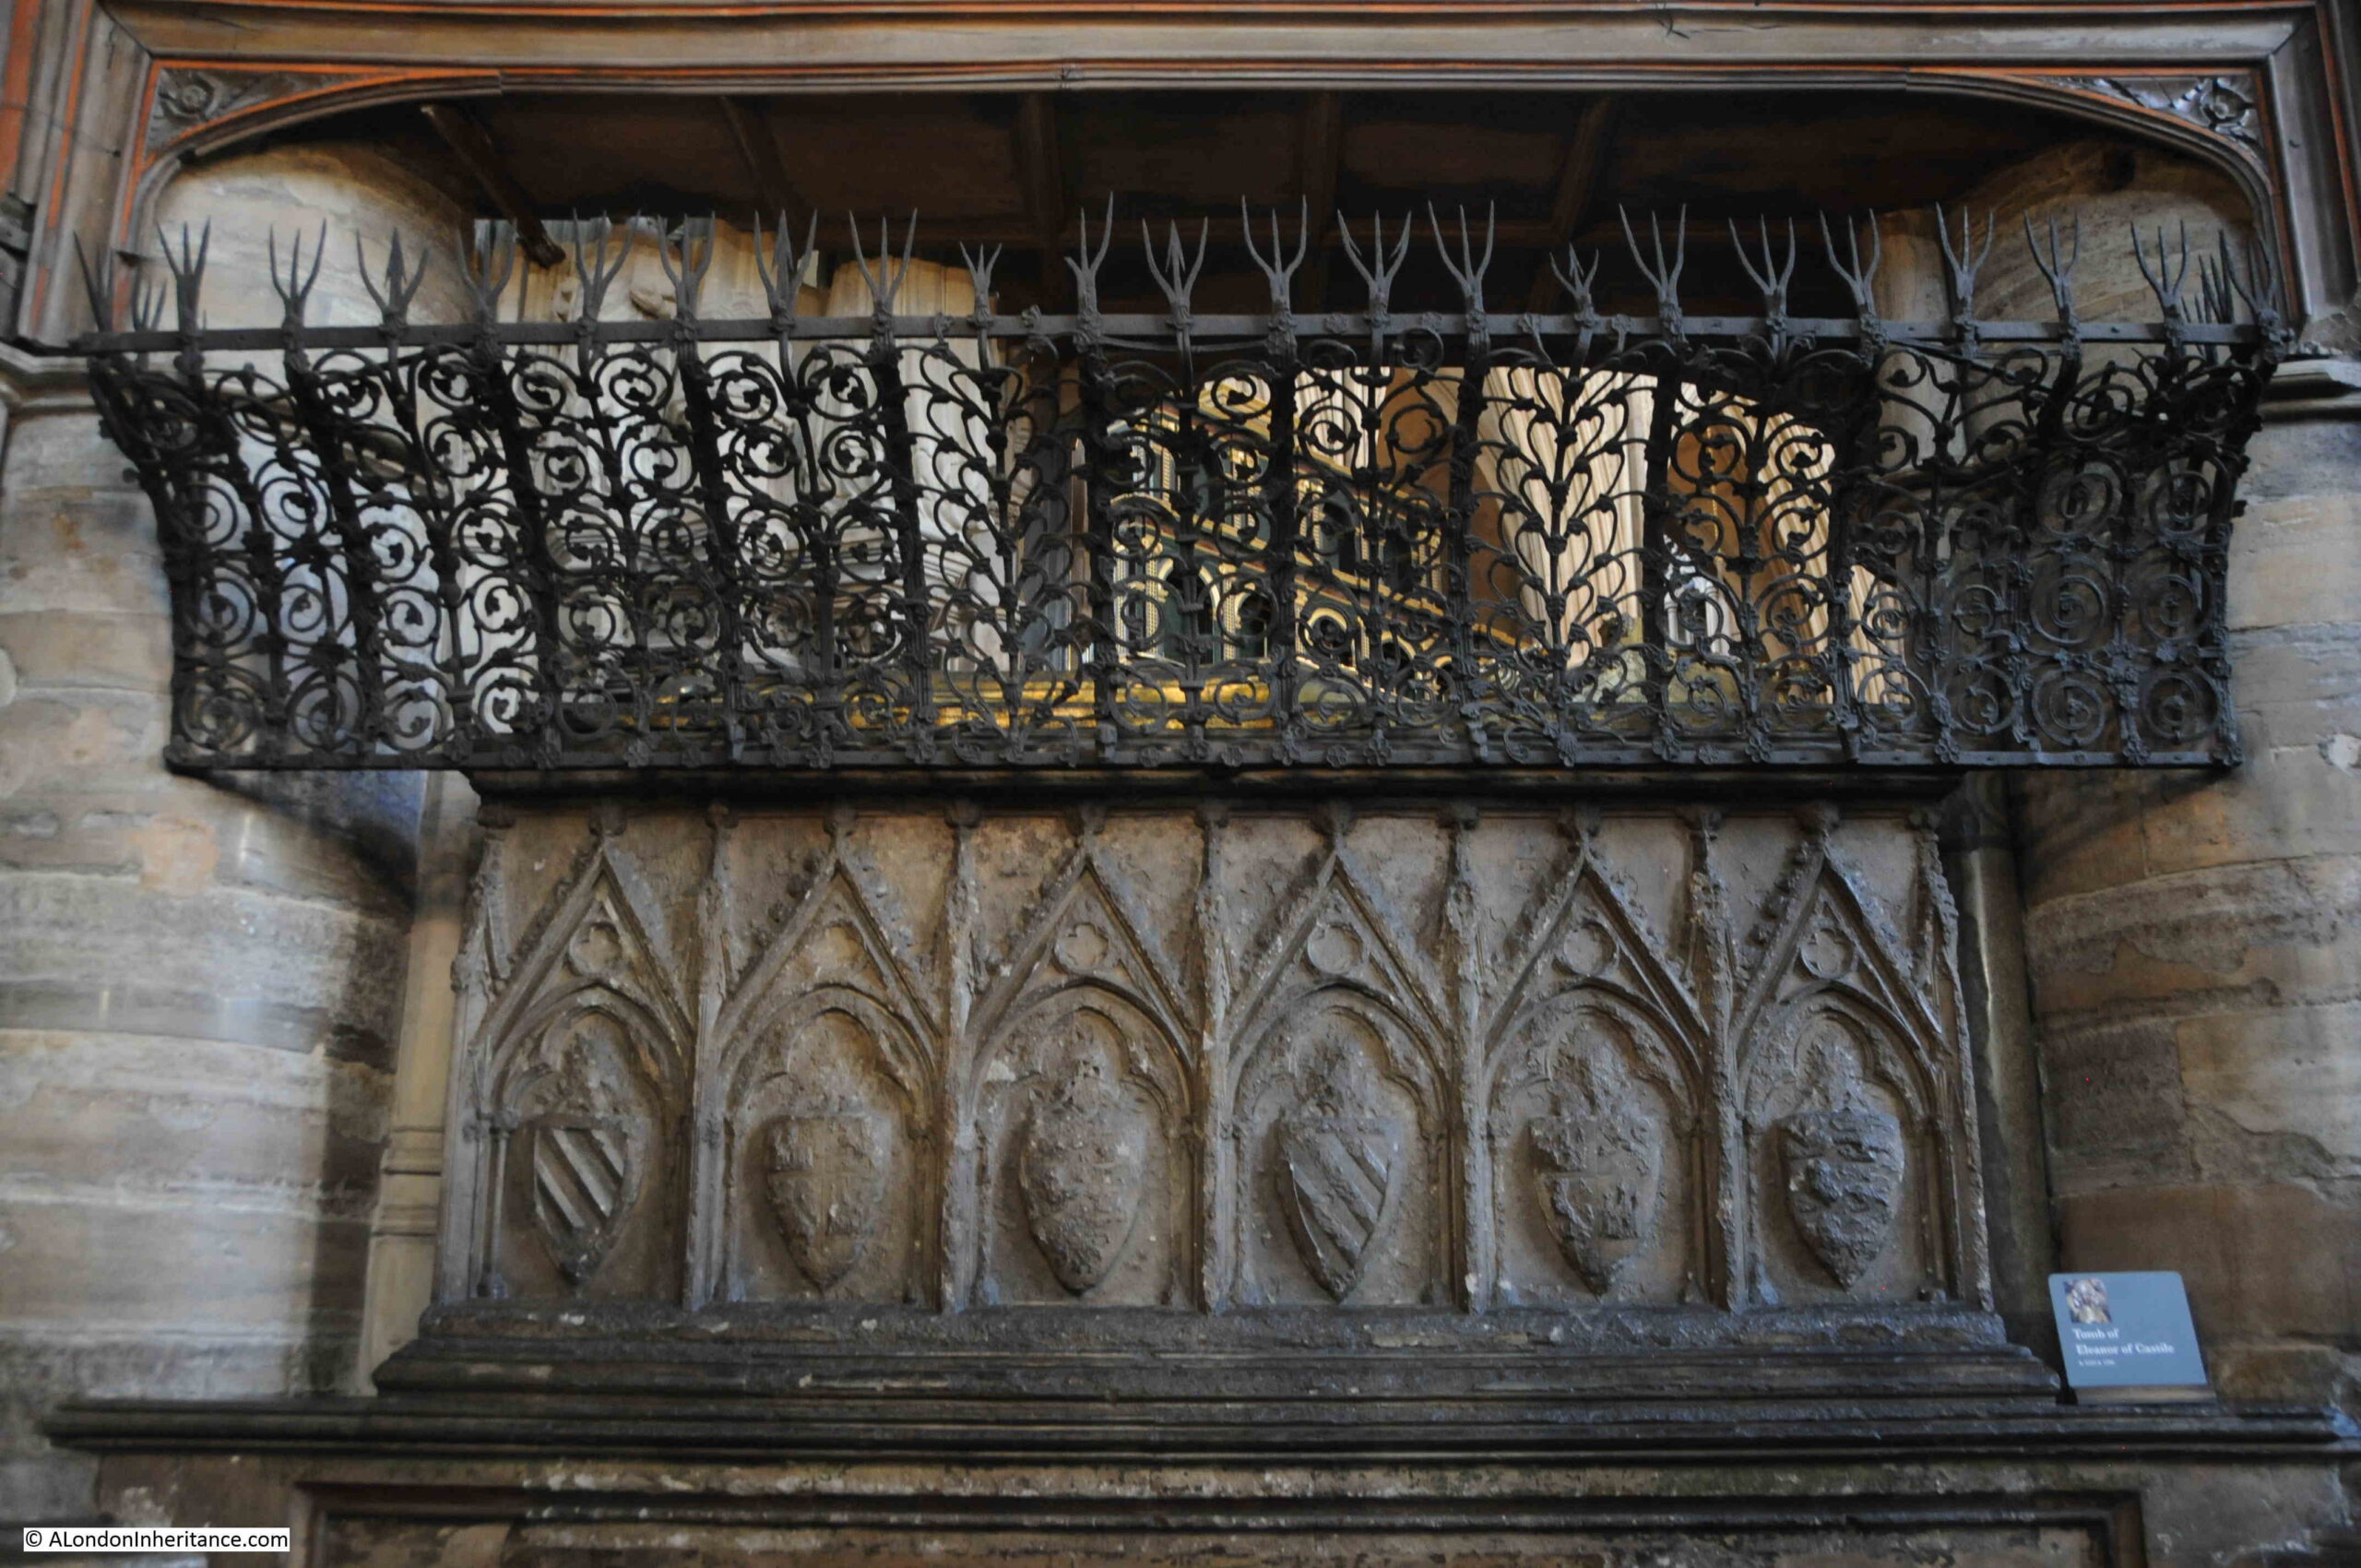 Eleanor of Castile's tomb in Westminster Abbey